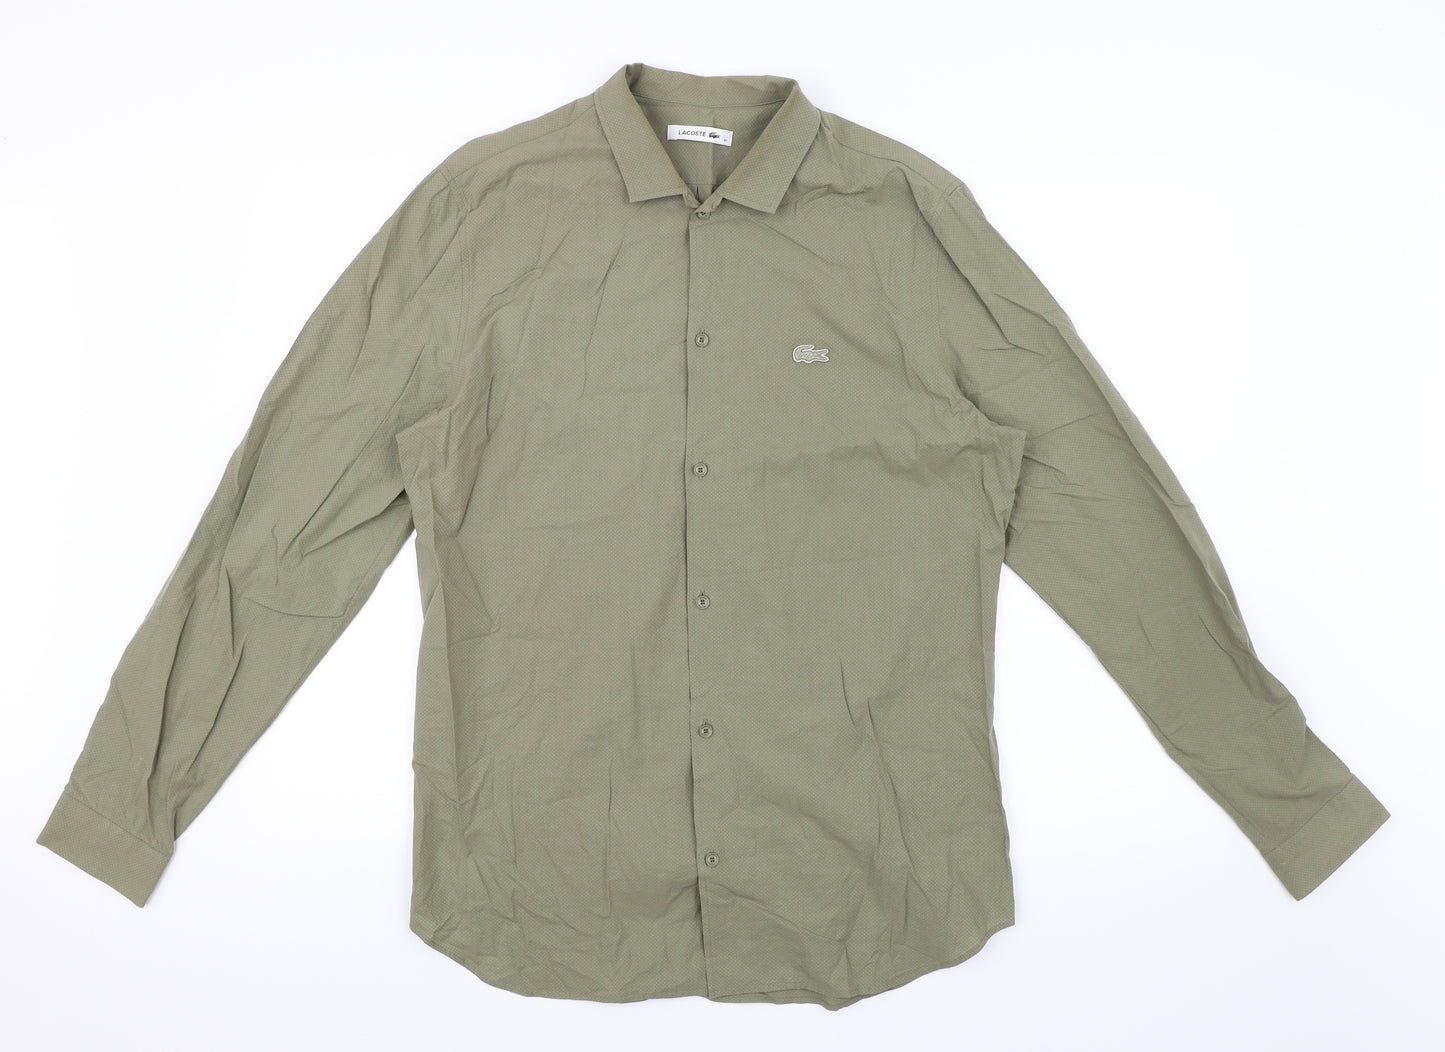 Lacoste Mens Green    Button-Up Size 41